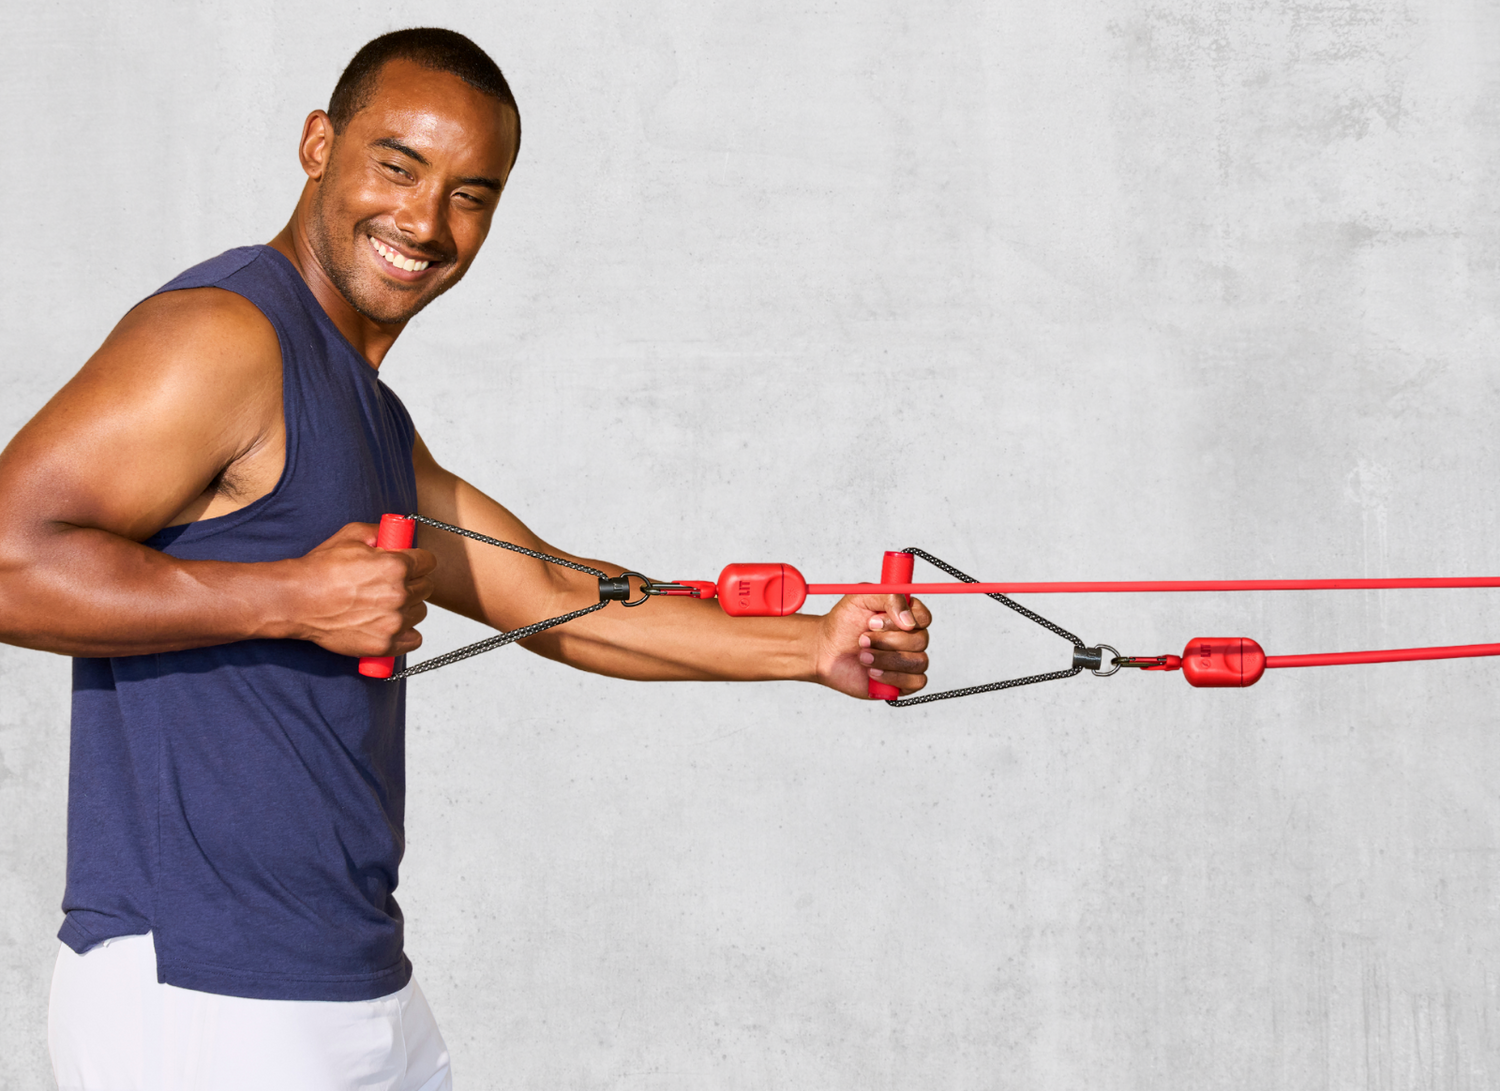 15 Resistance Band Exercises For Arms: Build Biceps & Triceps At Home